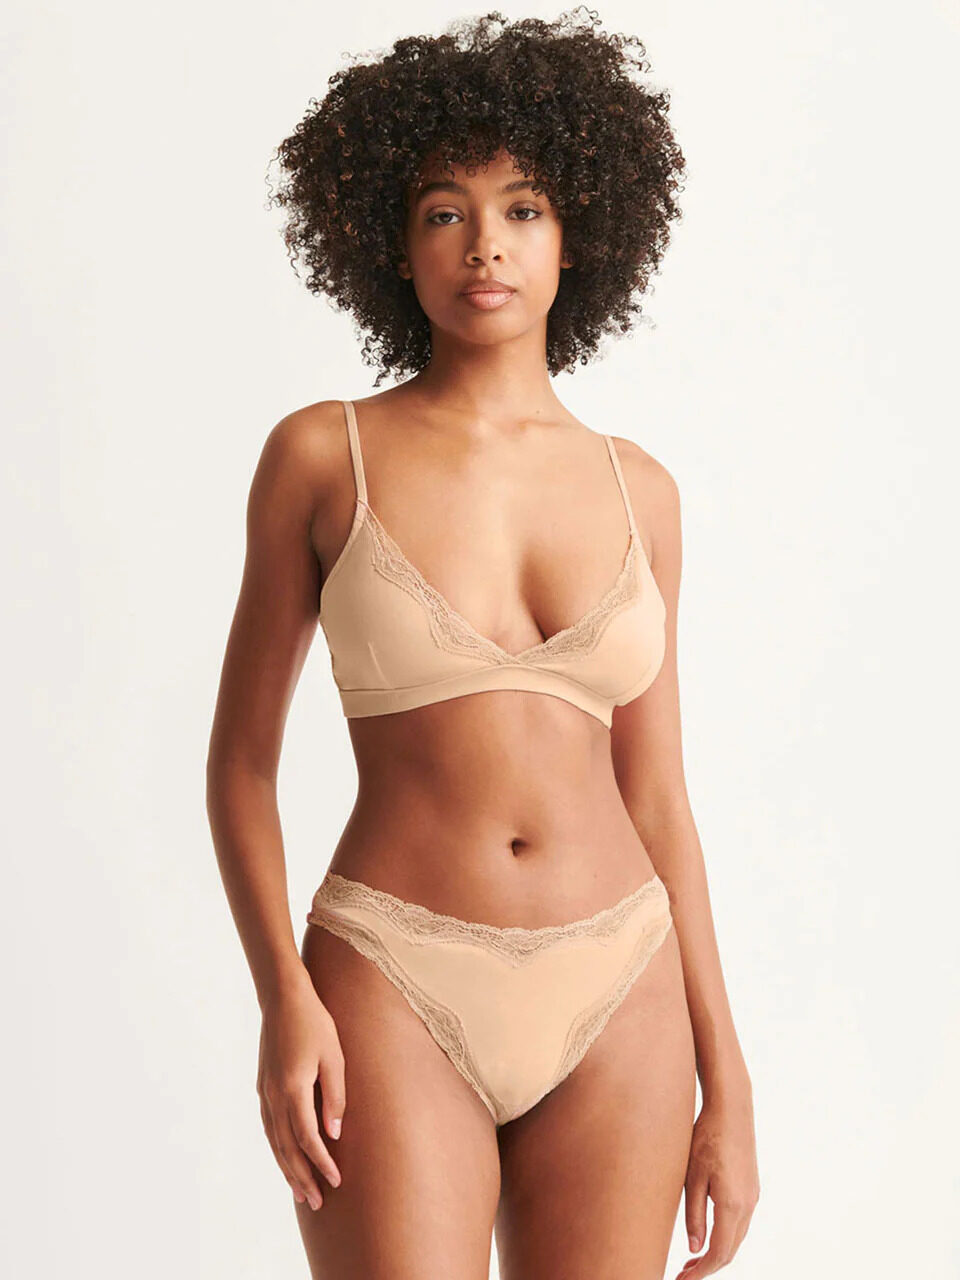 A model wearing a nude lace two piece organic bra and underwear set from Skin.